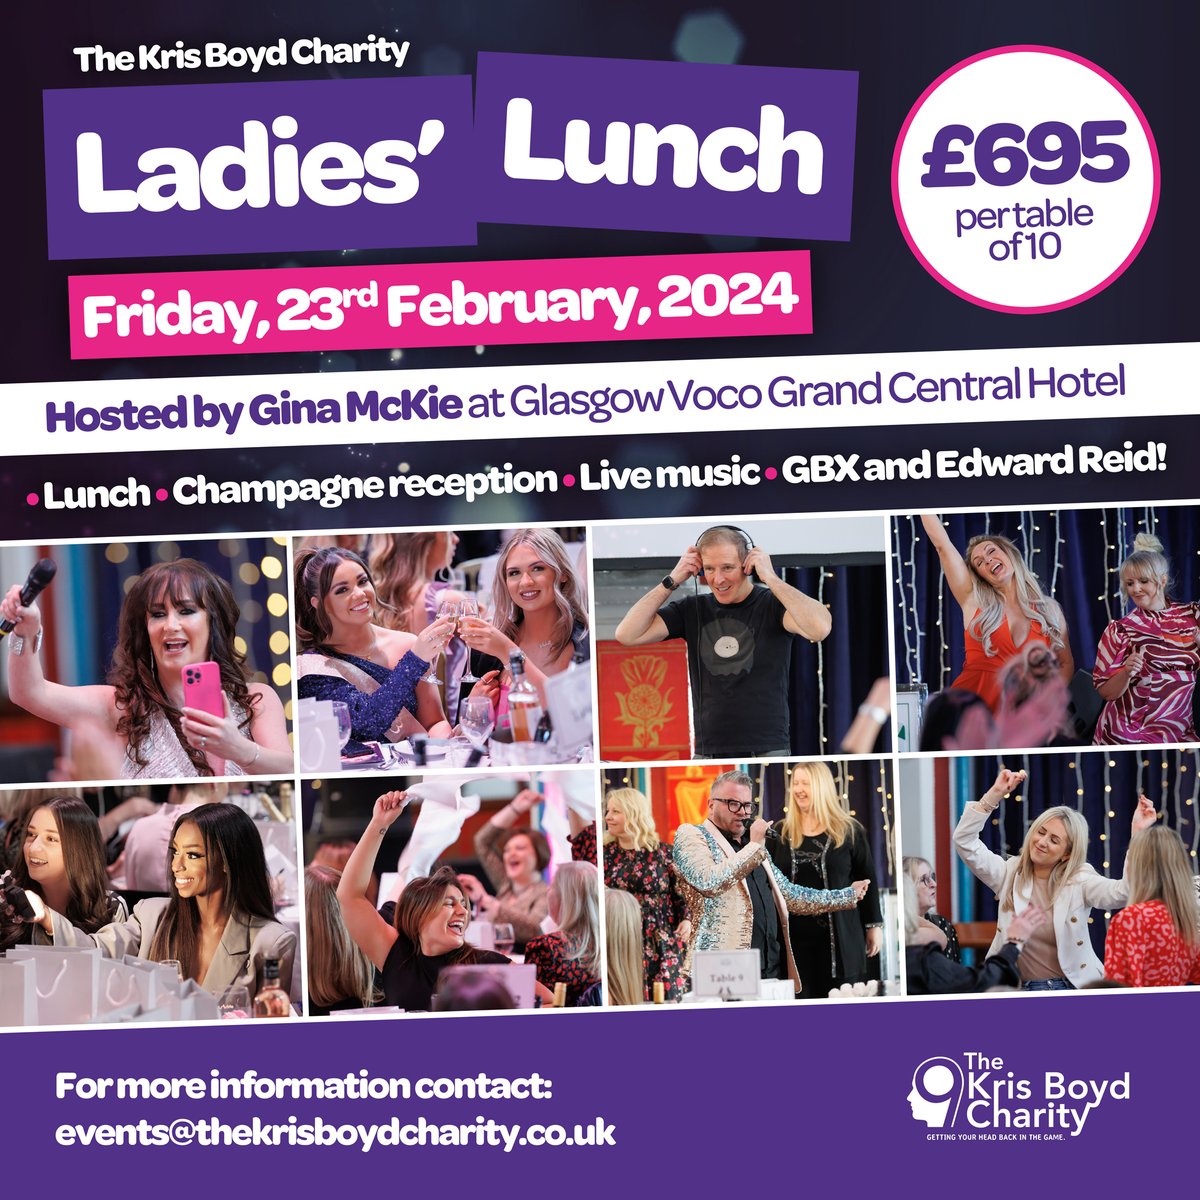 Sadly, there are no more events in 2023... BUT our Ladies' Lunch has just been announced for Friday, 23rd February, 2024! Gina McKie hosts, and we'll be also be joined by @mredwardreid and @GBXANTHEMS! Contact events@thekrisboydcharity.co.uk for more info or to book your table.